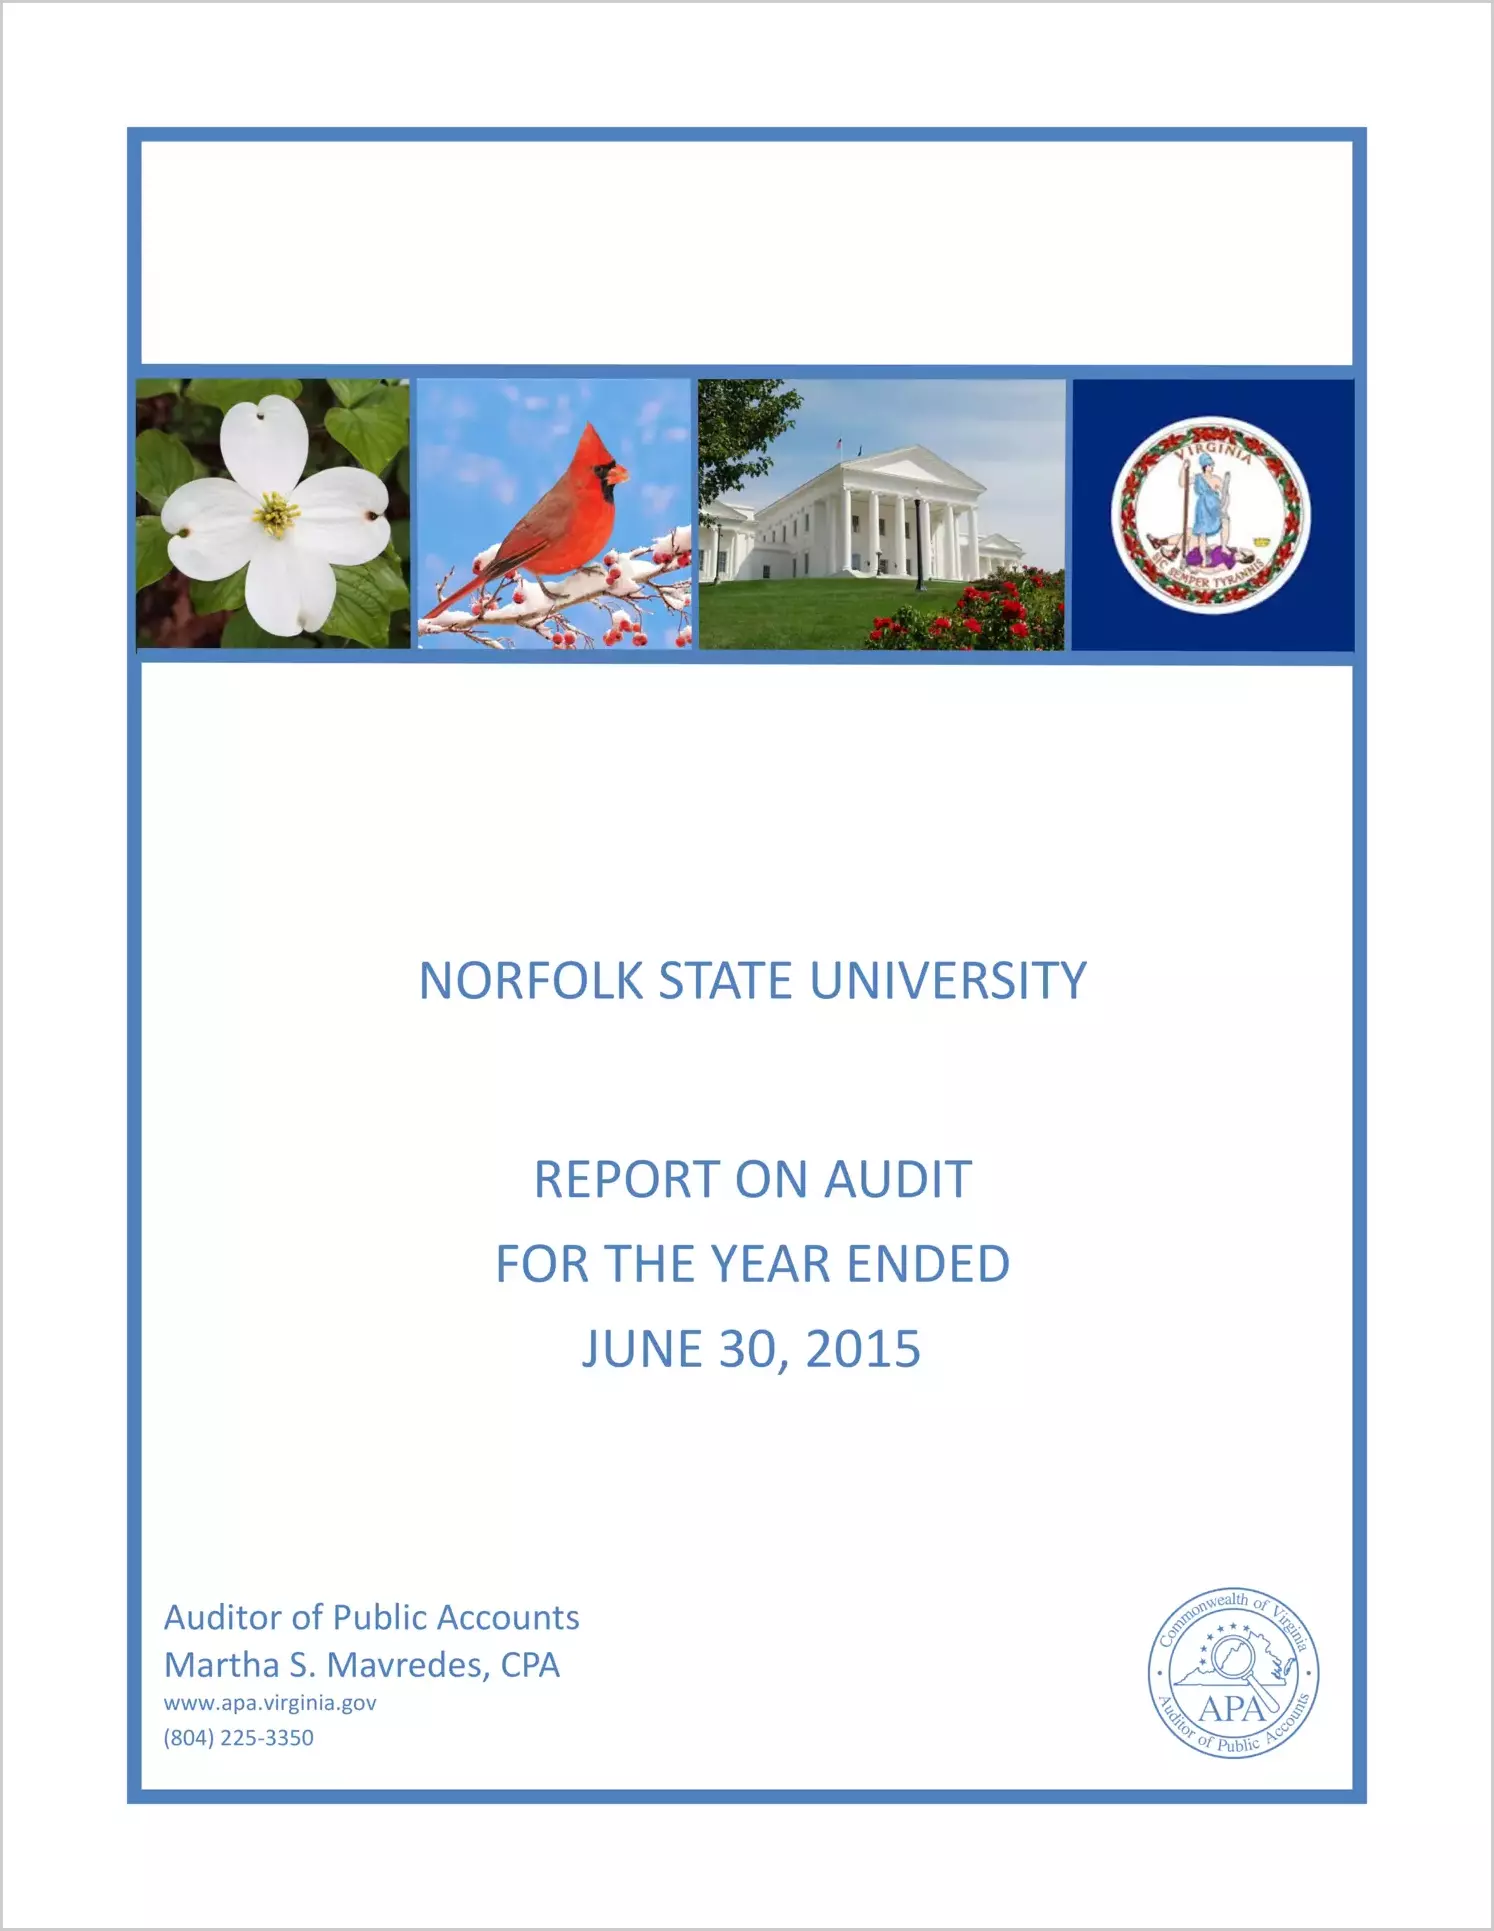 Norfolk State University report on audit for the year ended June 30, 2015